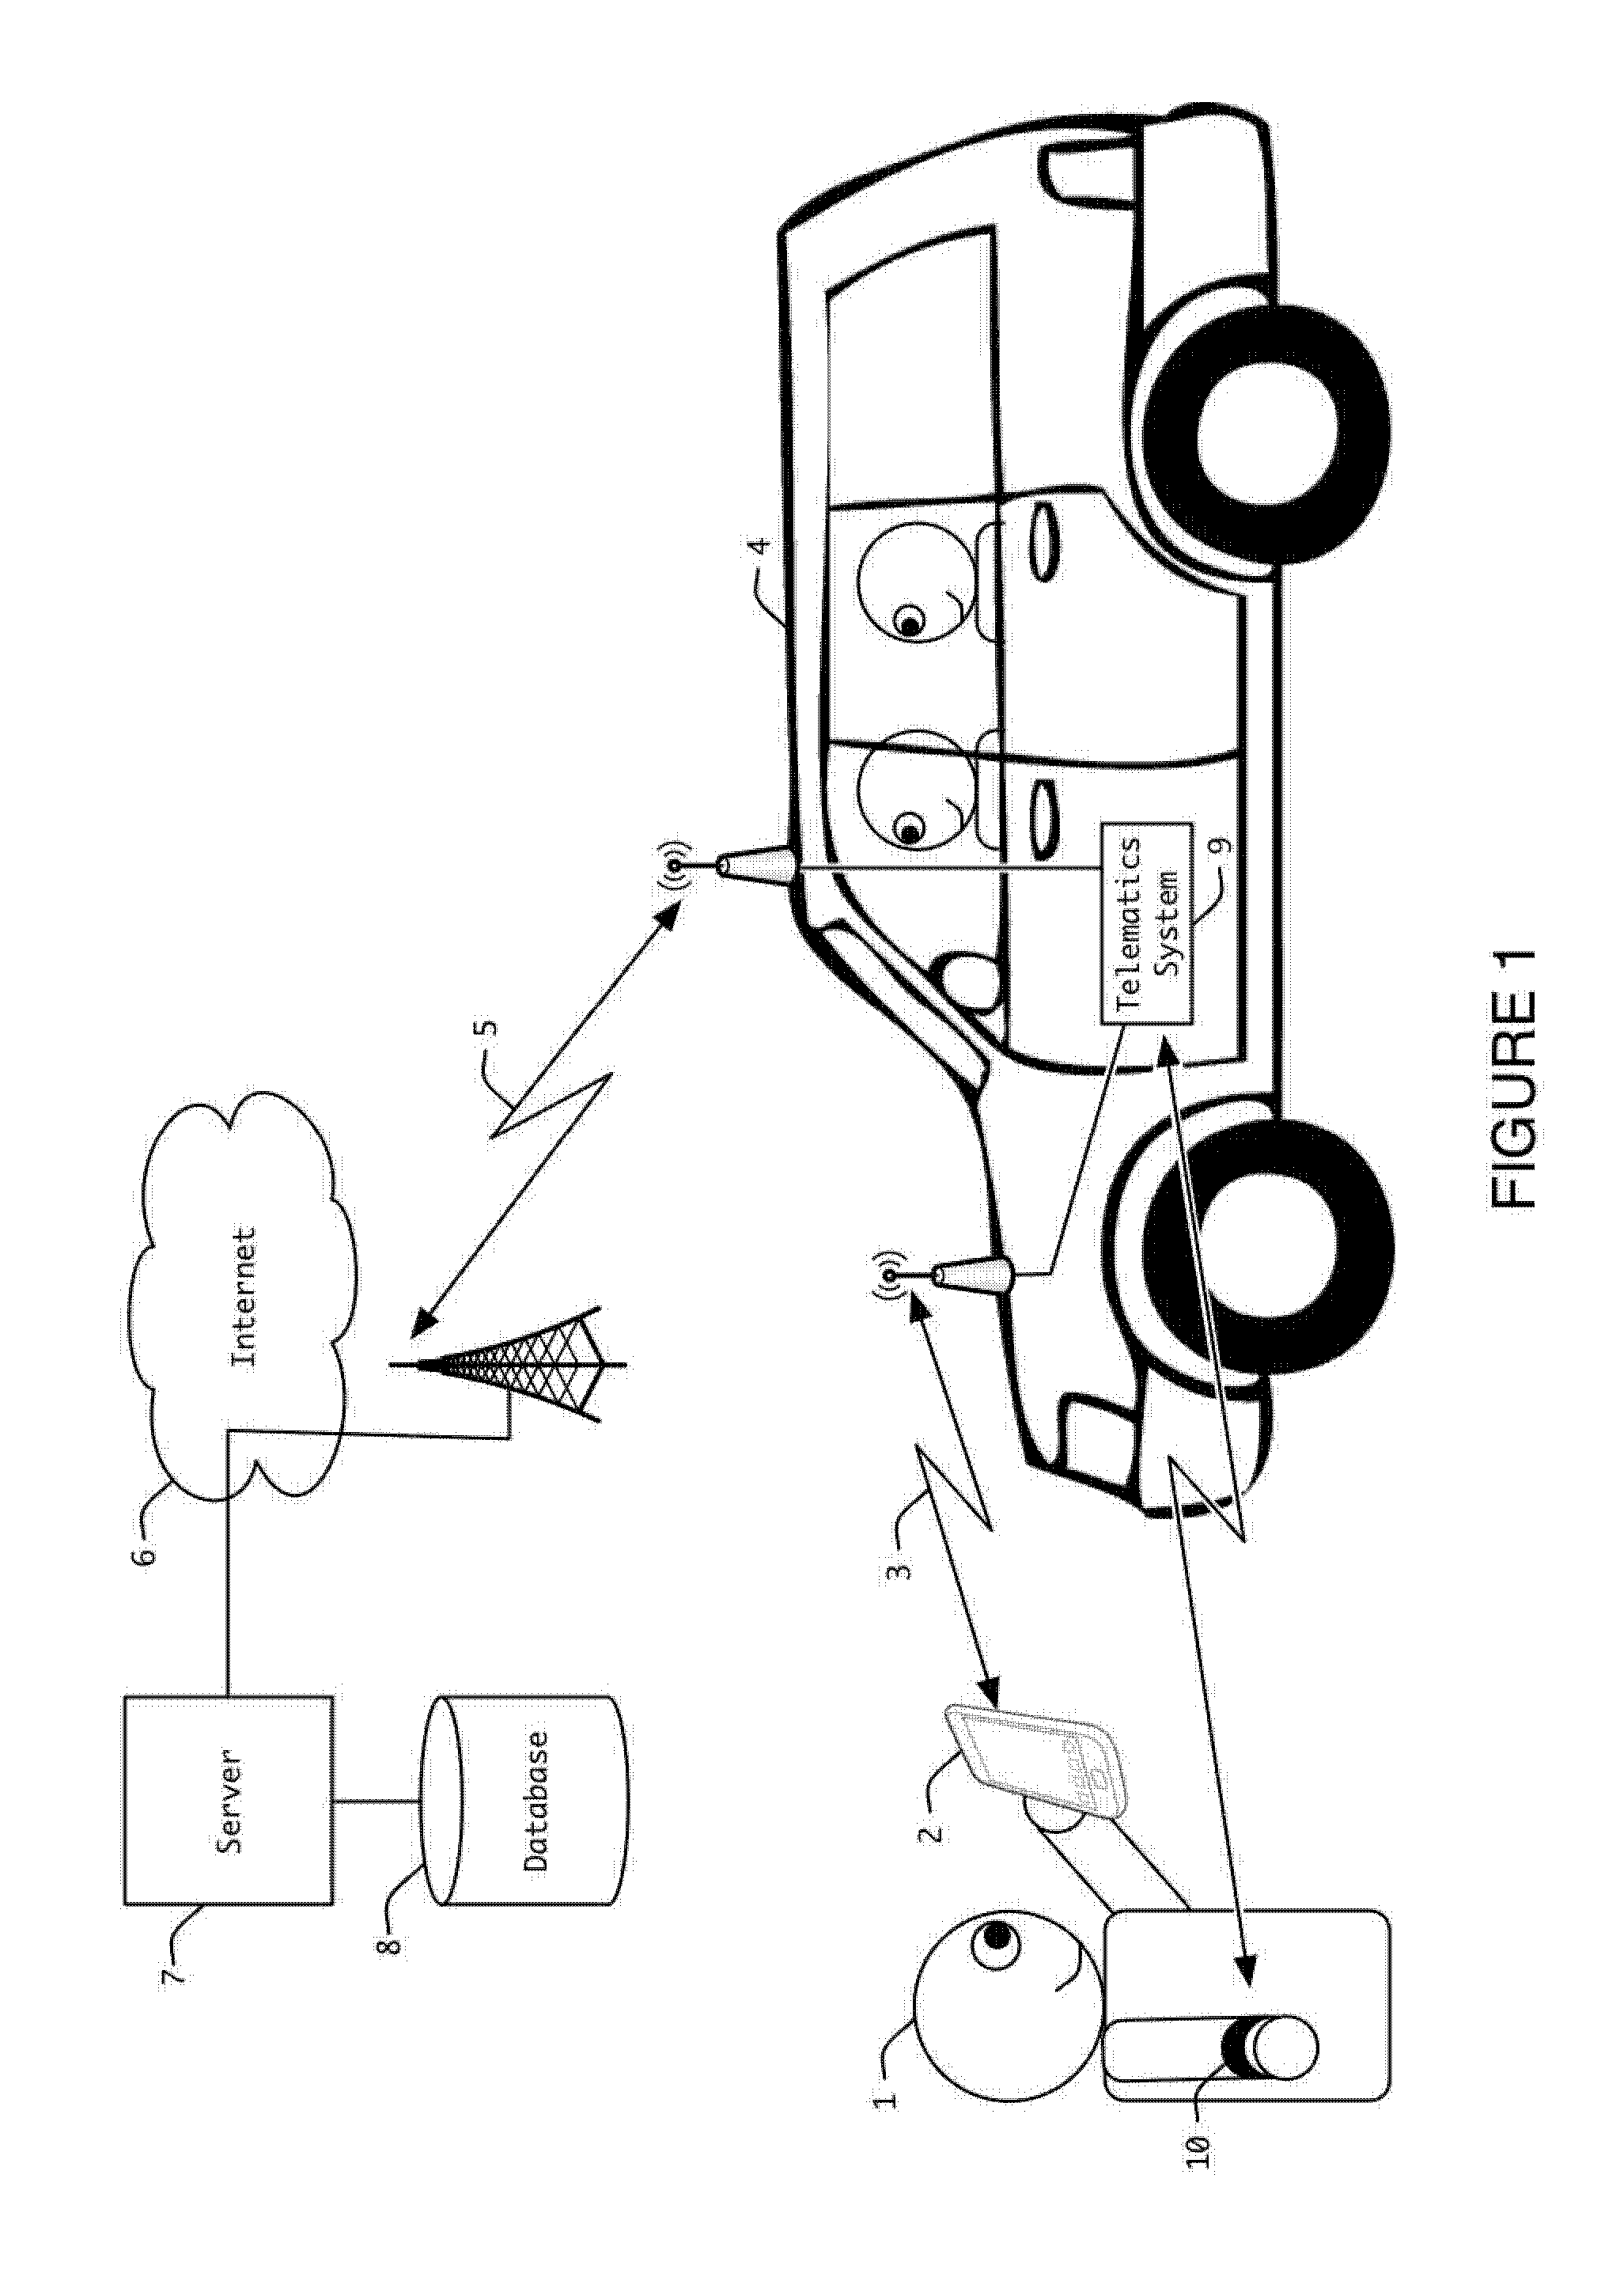 System and Method for Wirelessly Rostering a Vehicle